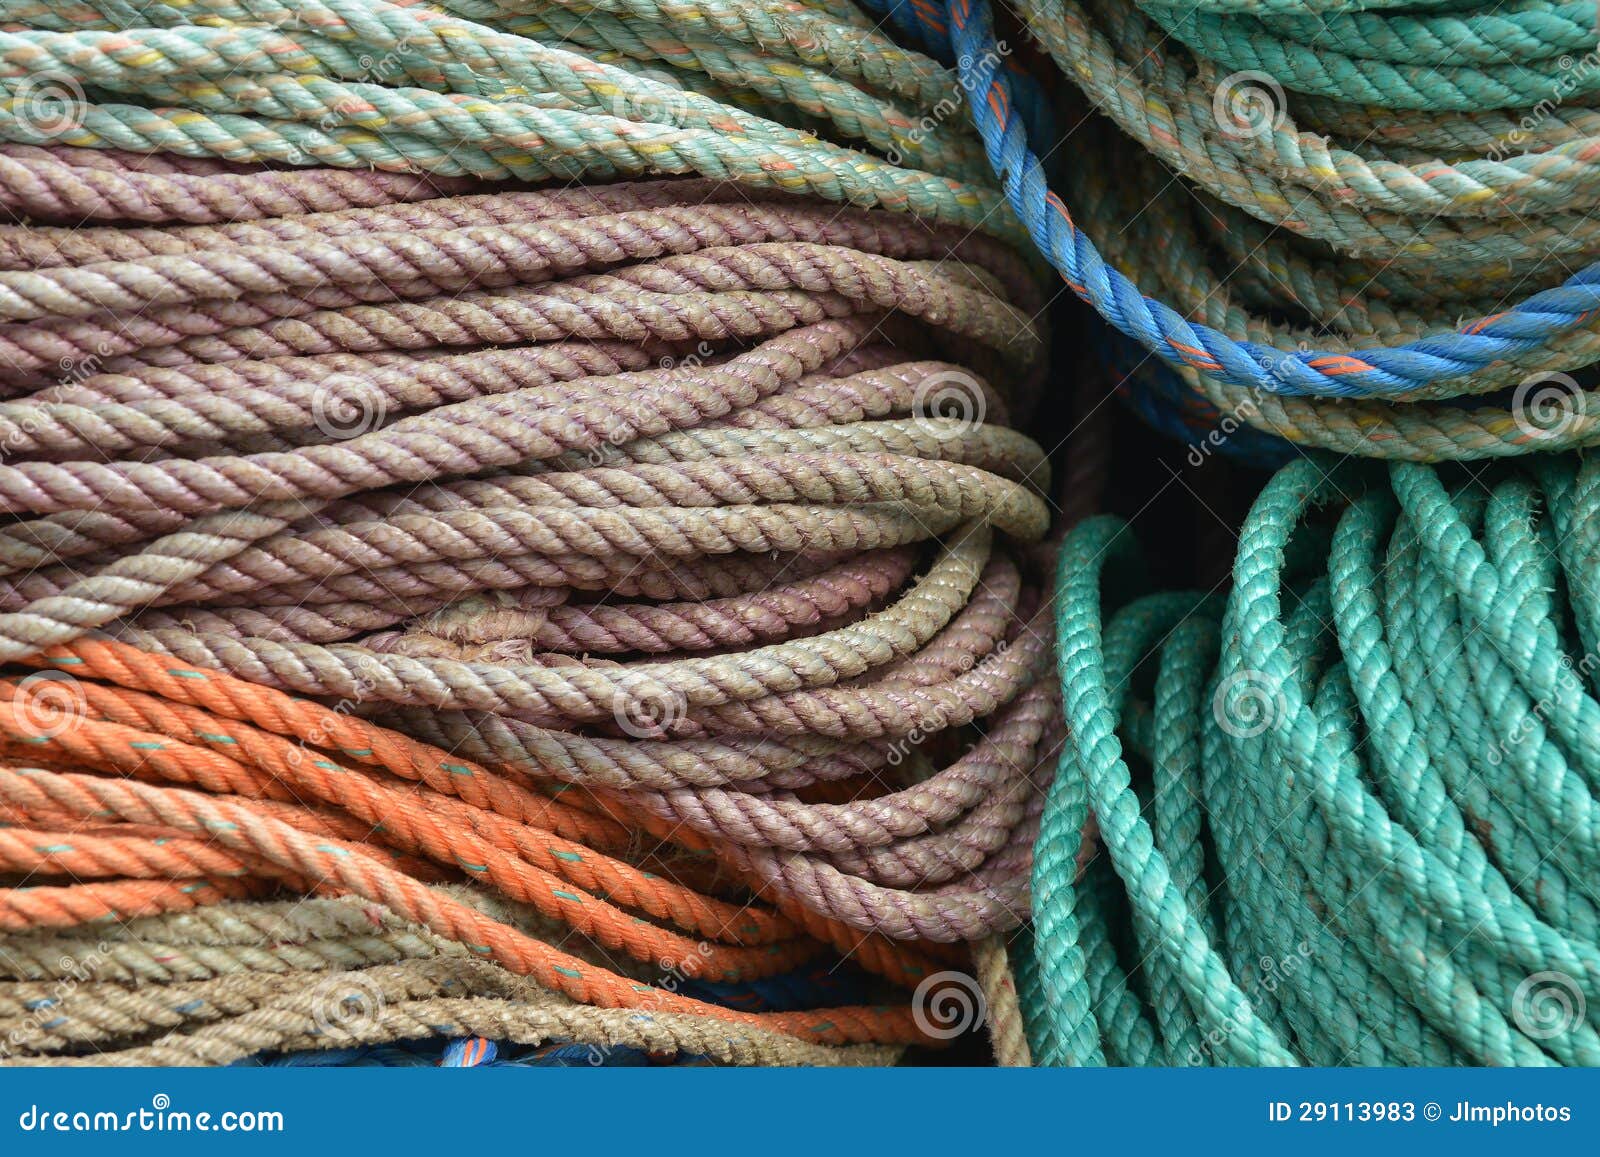 Nylon Rope Used for Lobster Fishing Details Stock Image - Image of pink,  gray: 29113983